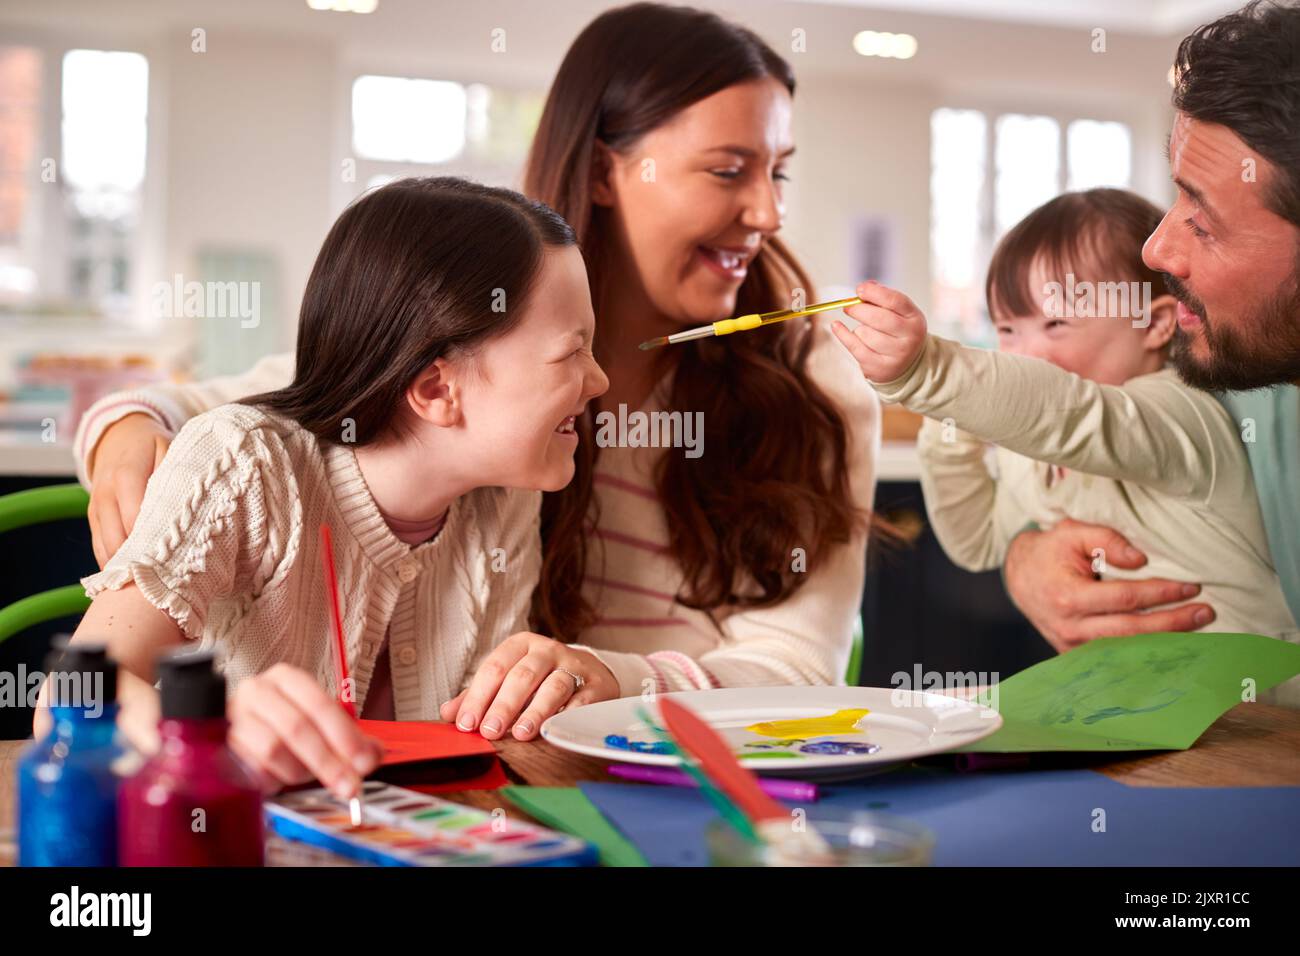 Family With Down Syndrome Daughter Sitting Around Table At Home Doing Craft Together Stock Photo